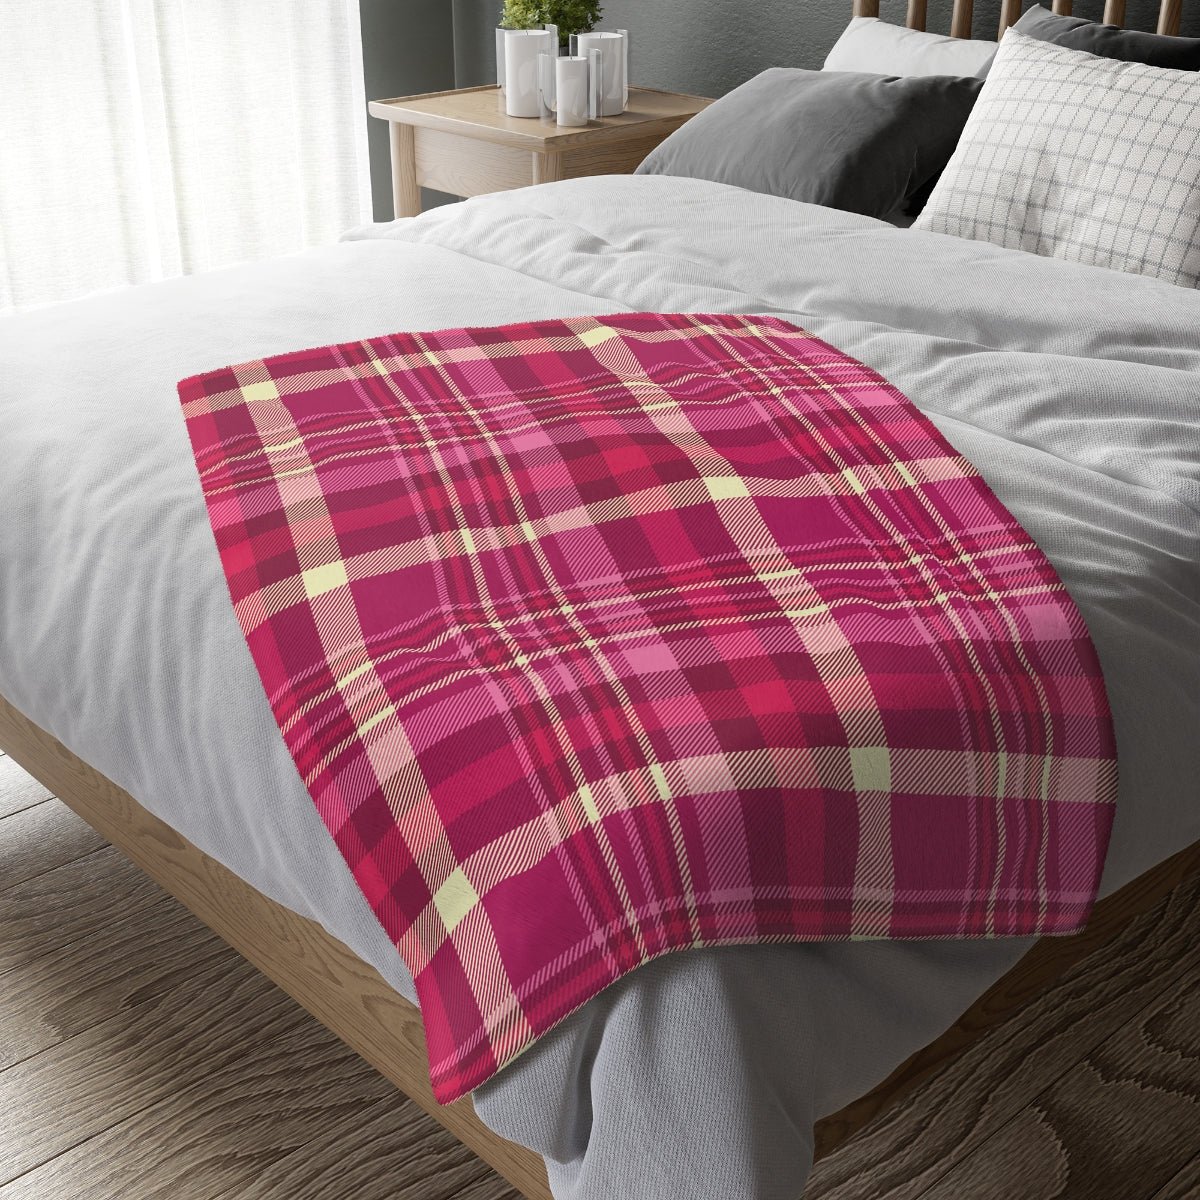 Pink and Purple Plaid Velveteen Minky Blanket (Two-sided print) - Puffin Lime